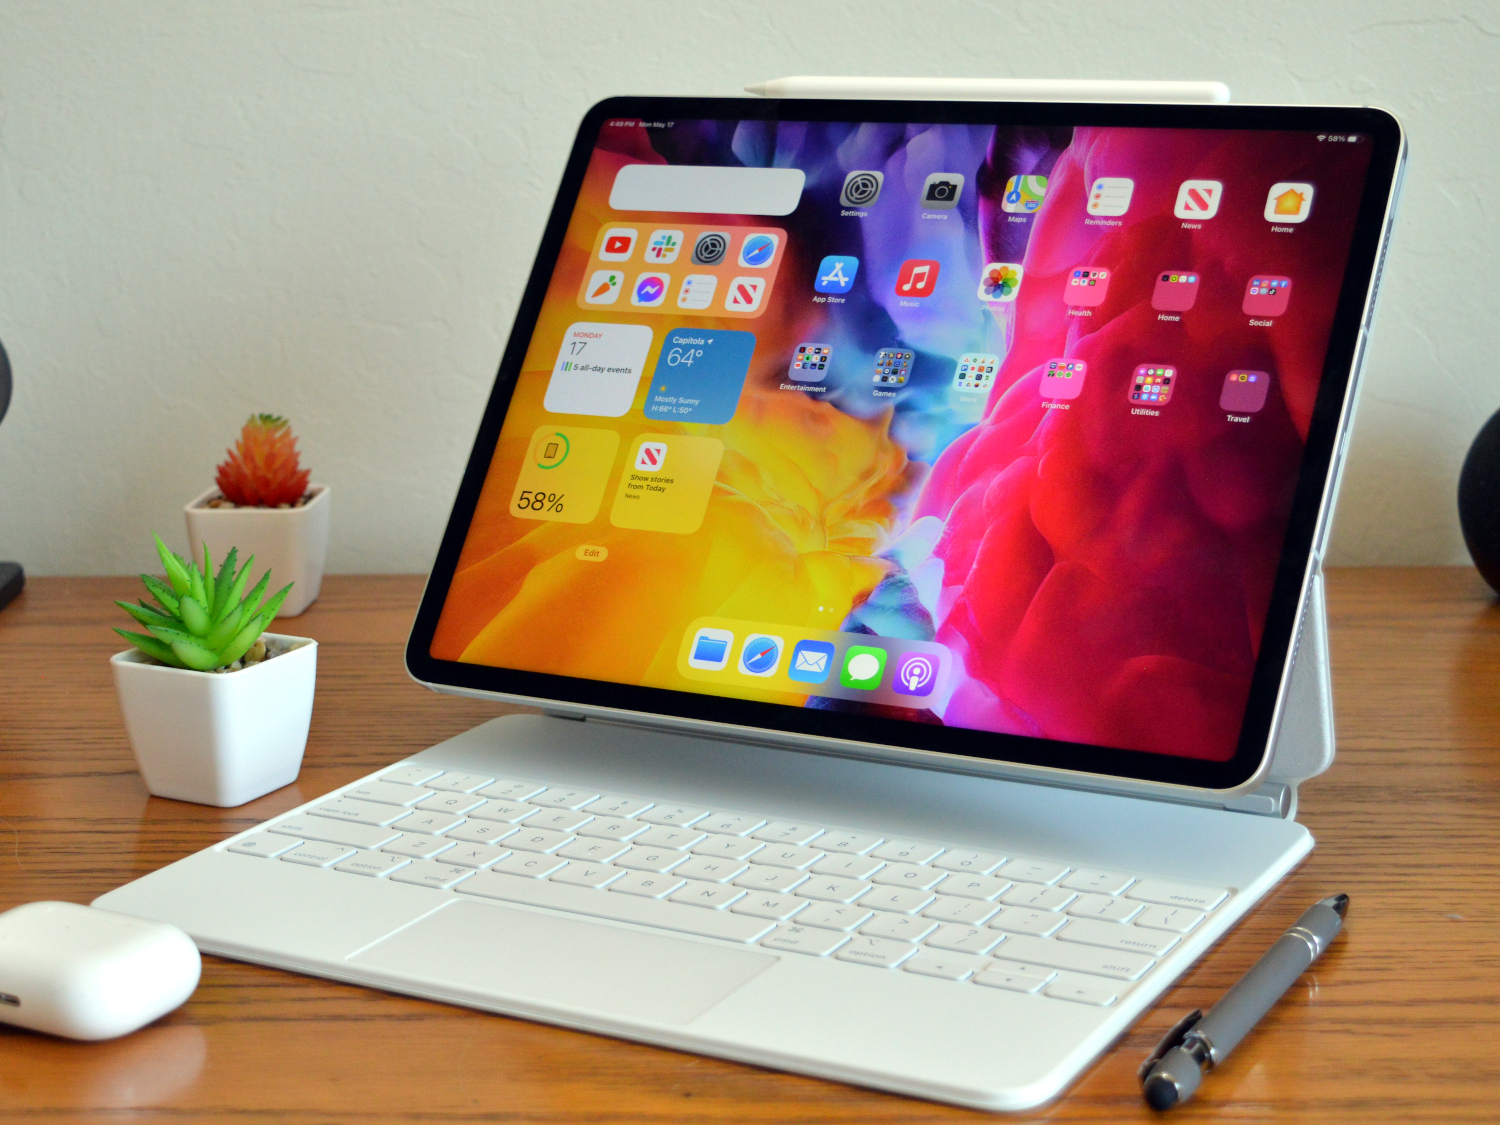 Apple iPad Pro 12.9-inch Review: The Best Gets Better | Digital Trends